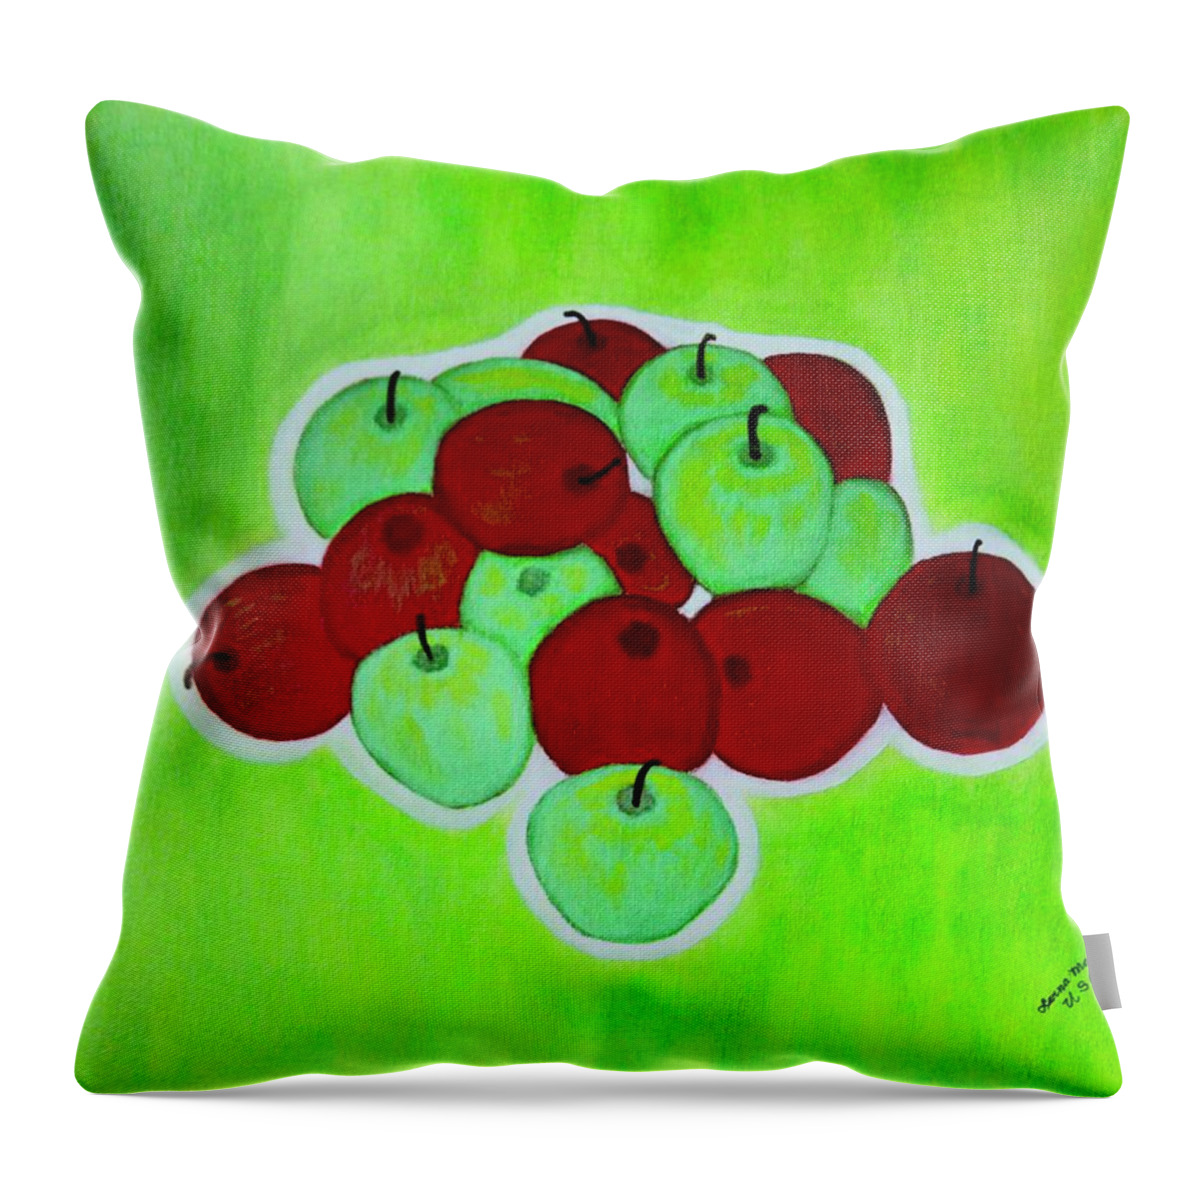 Apparel Throw Pillow featuring the painting Green And Red Apples by Lorna Maza